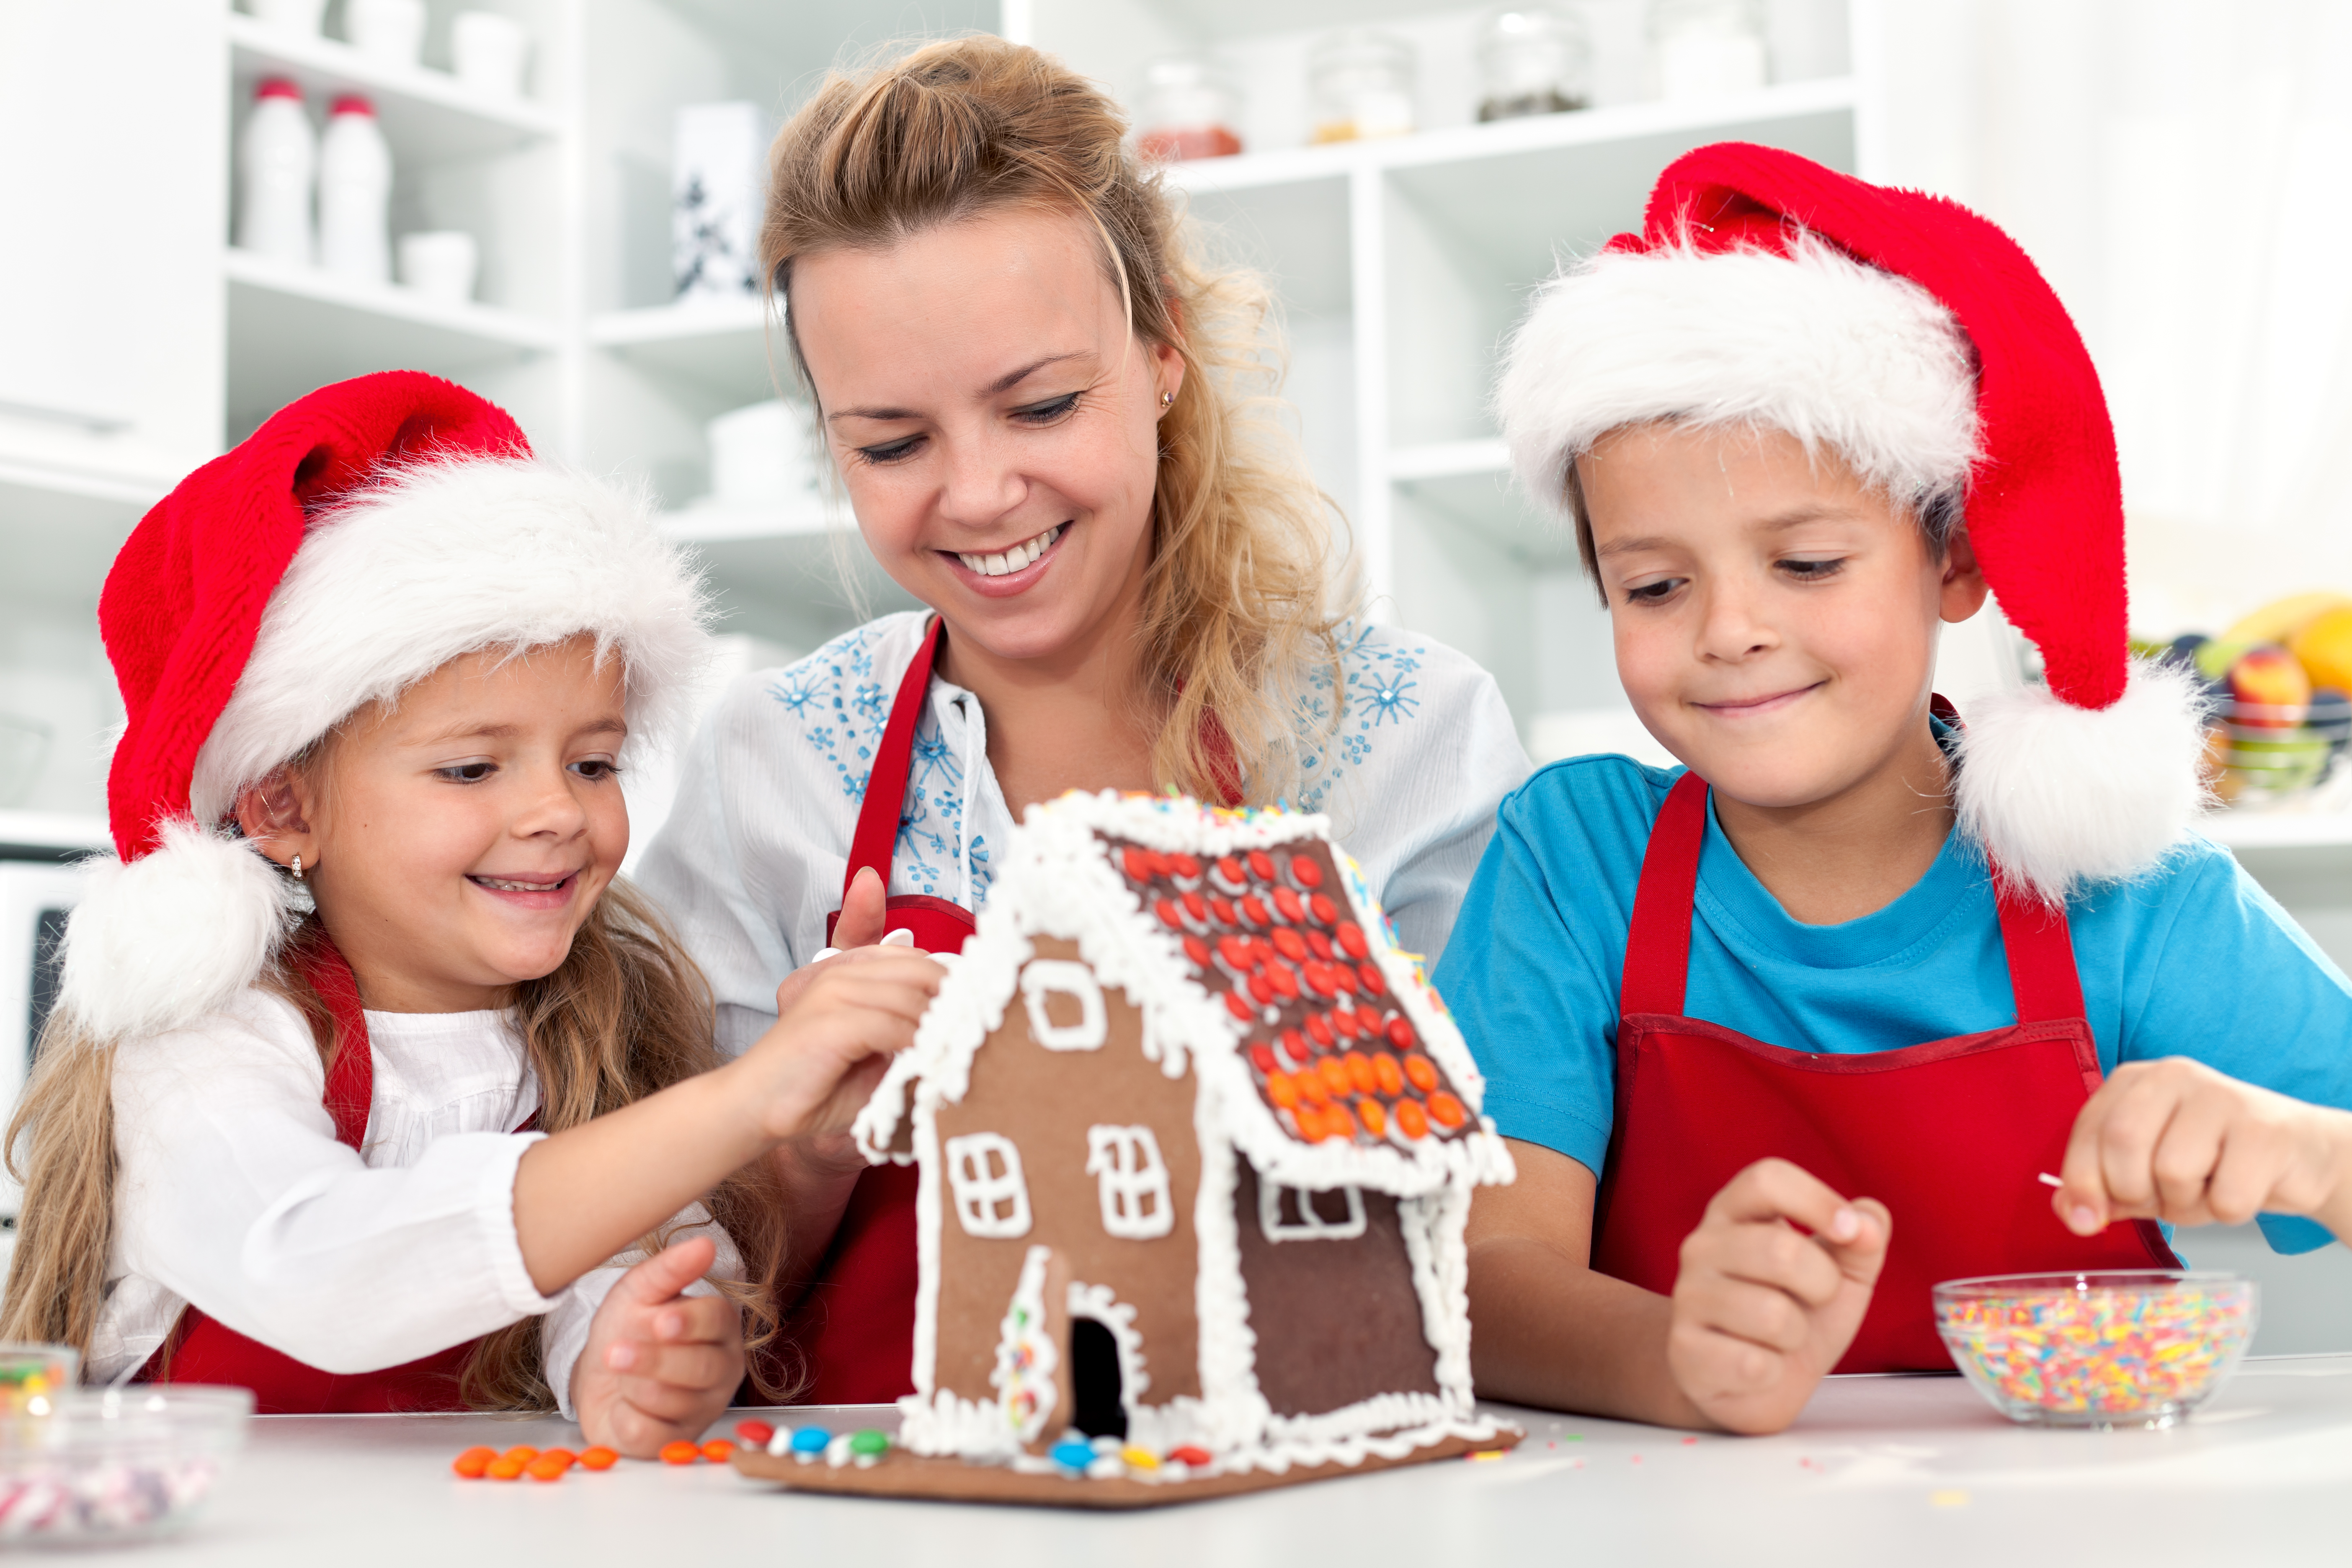 How to Make Christmas More Memorable for Your Family? Are you feeling the pressure to create a perfect holiday for your children? Here are easy and fun activities that you and your kids will love, minus the overwhelm. #christmas #familyfun #makingmemories #funmom #simpleChristmas #Christmasfamilyfun #family #christmasfamilytime #thisarethemoment #funfamilytime #makingmemoriestogether #slowandsimpledays #creativemommy #handsonlearning  #learningwell